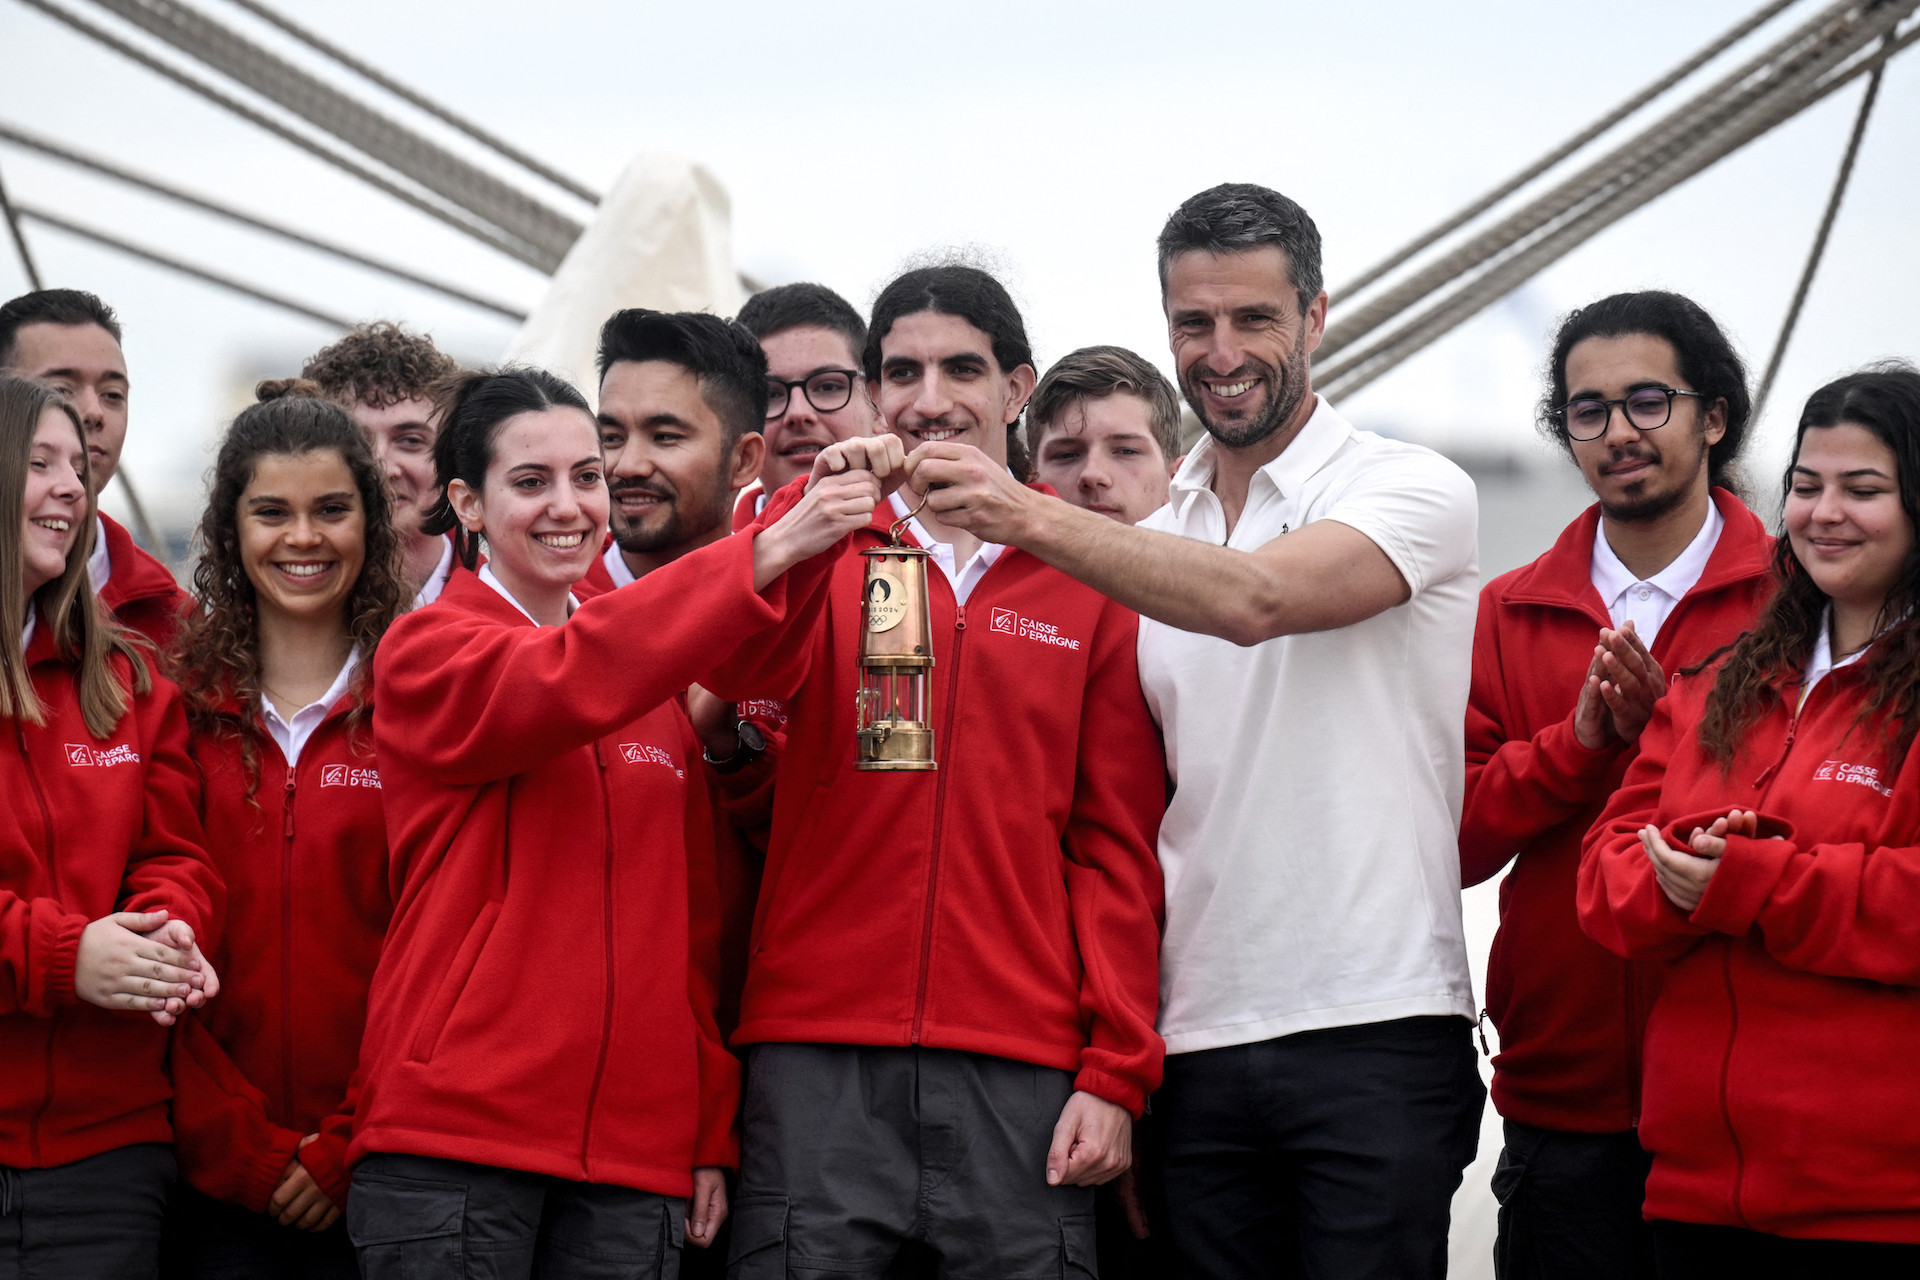 Tony Estanguet poses with sailors of the Belem in Athens. GETTY IMAGES